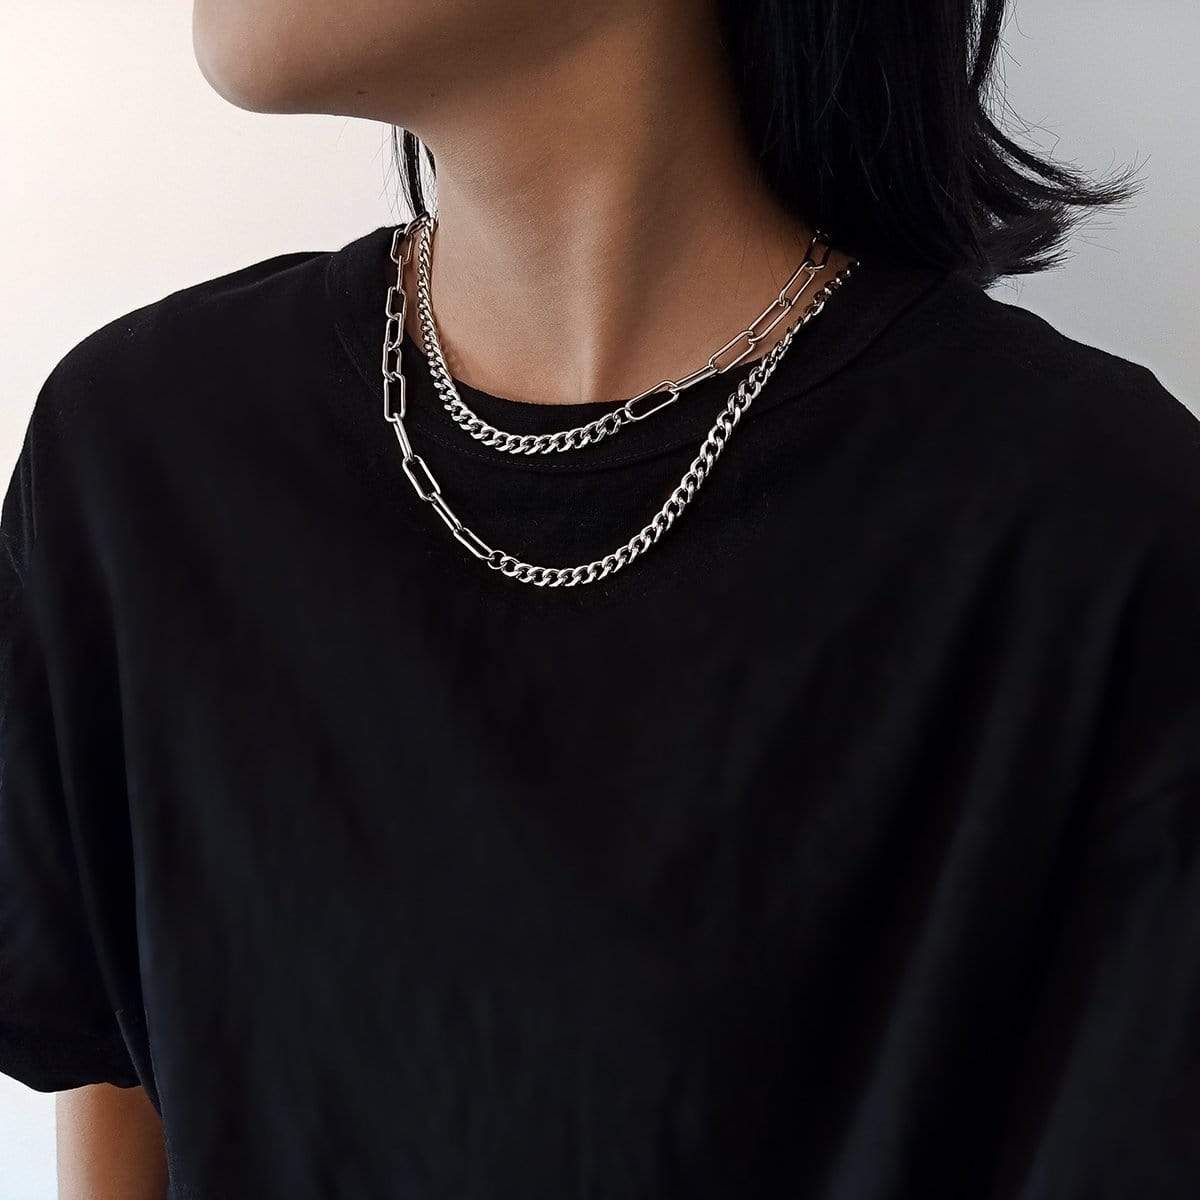 Stainless Steel Layered Curb Link Chain Necklace Set - ArtGalleryZen